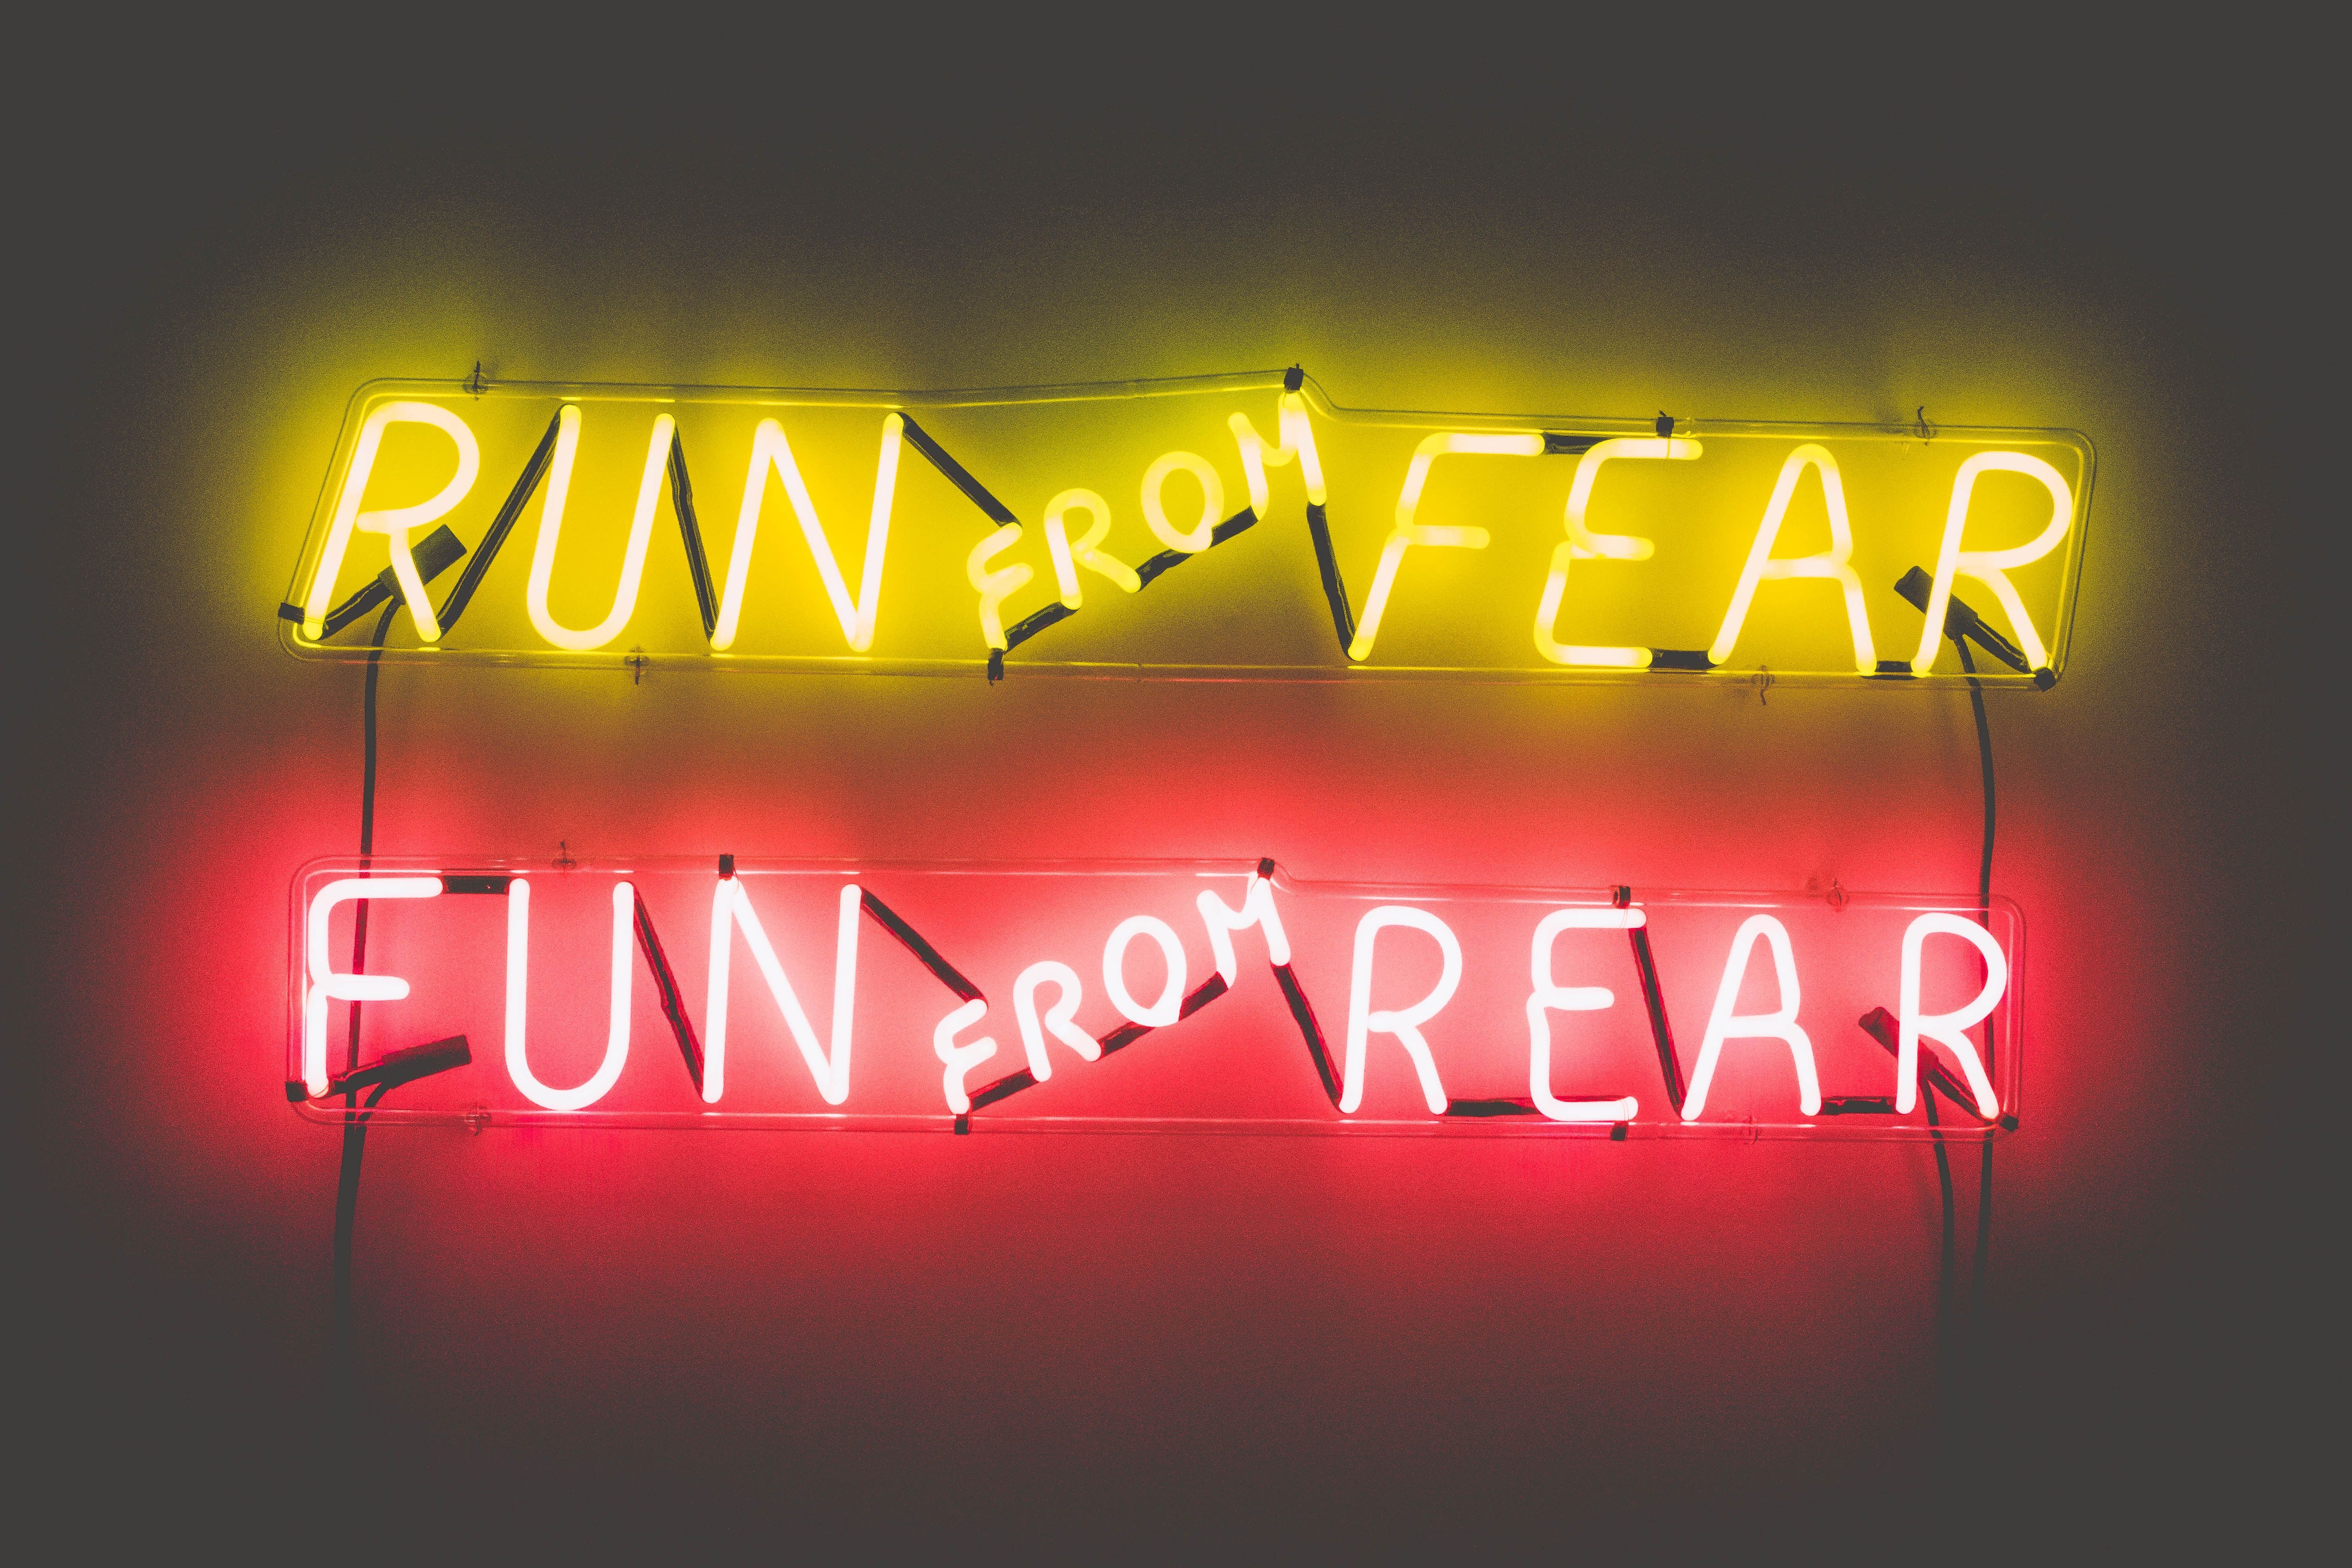 3968x2976 #text, #fun, #real, #wall sign, #rear, #yellow neon, #funny wallpaper, #type, #pink neon, #yellow, #run, #wall art, #typography, #PNG image, #fear, #neon sign, #pink, #sign, #funny background, #neon light, #wallpaper